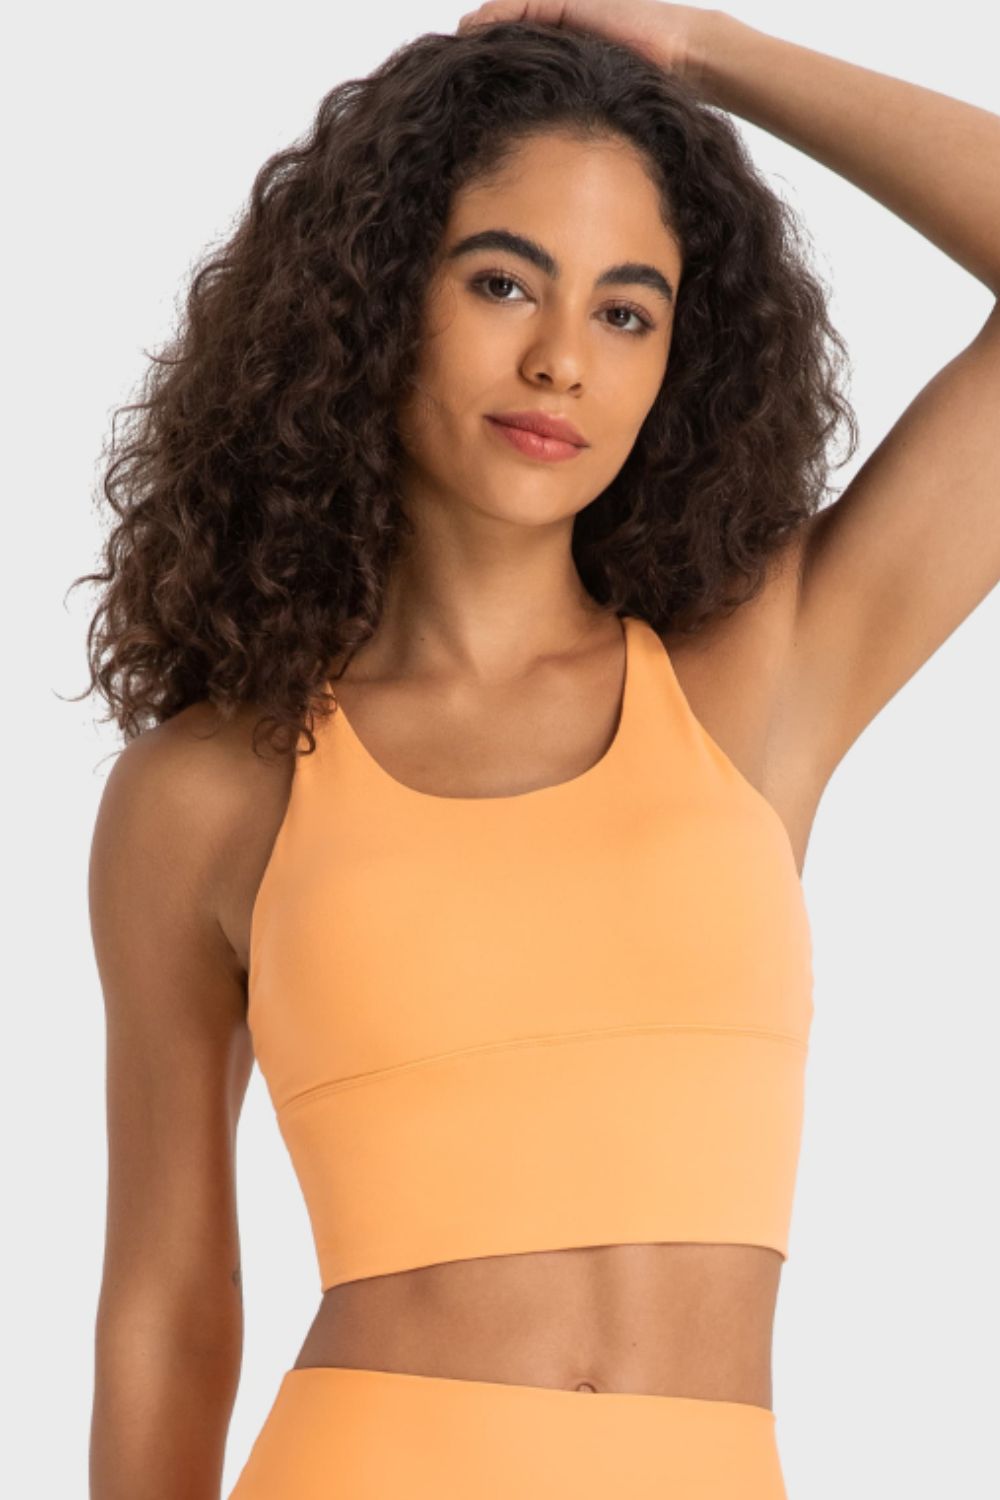 Sports Bra With Criss Cross Ladder Back Straps